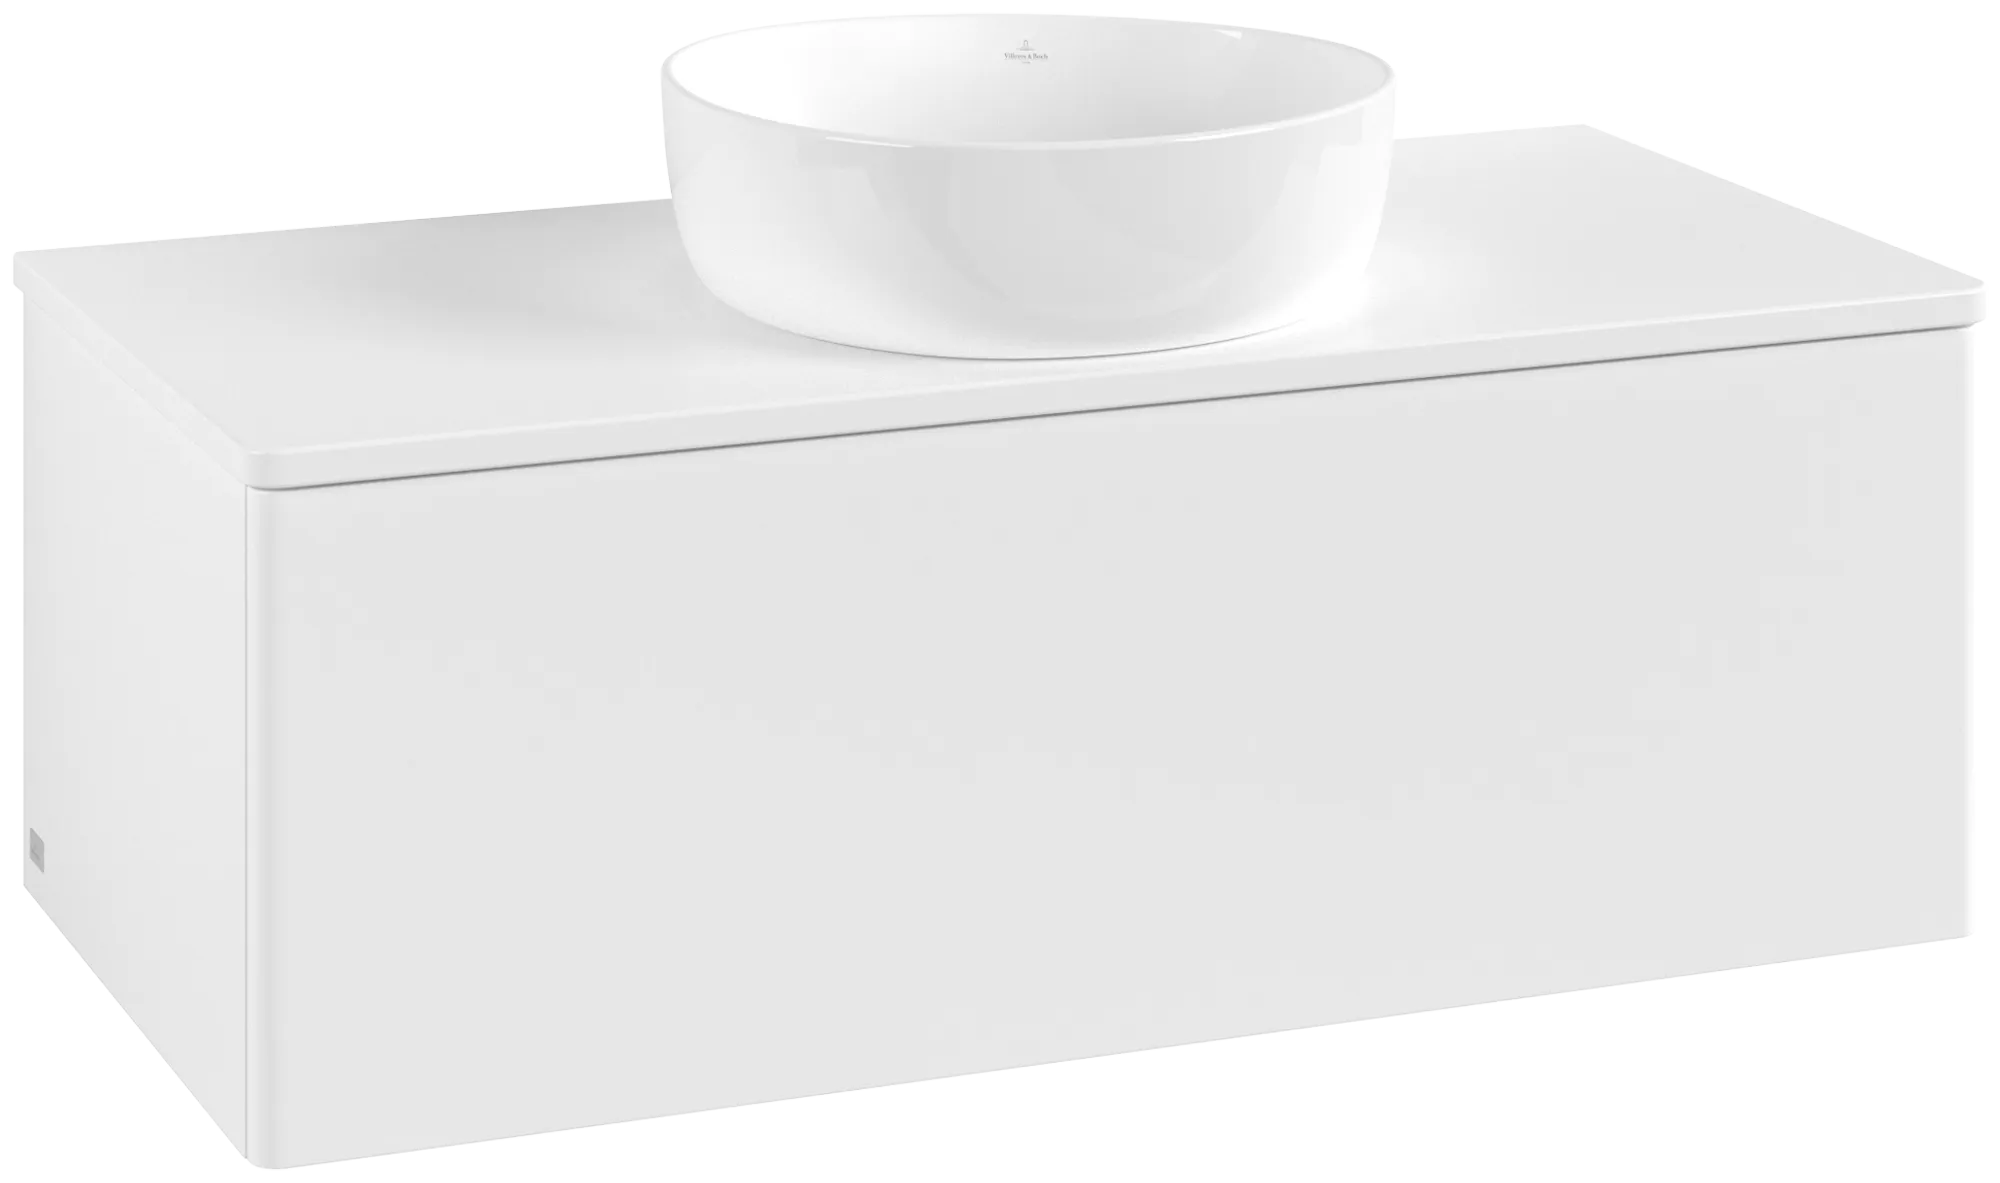 Obrázek VILLEROY BOCH Antao Vanity unit, 1 pull-out compartment, 1000 x 360 x 500 mm, Front without structure, White Matt Lacquer / White Matt Lacquer #K31050MT